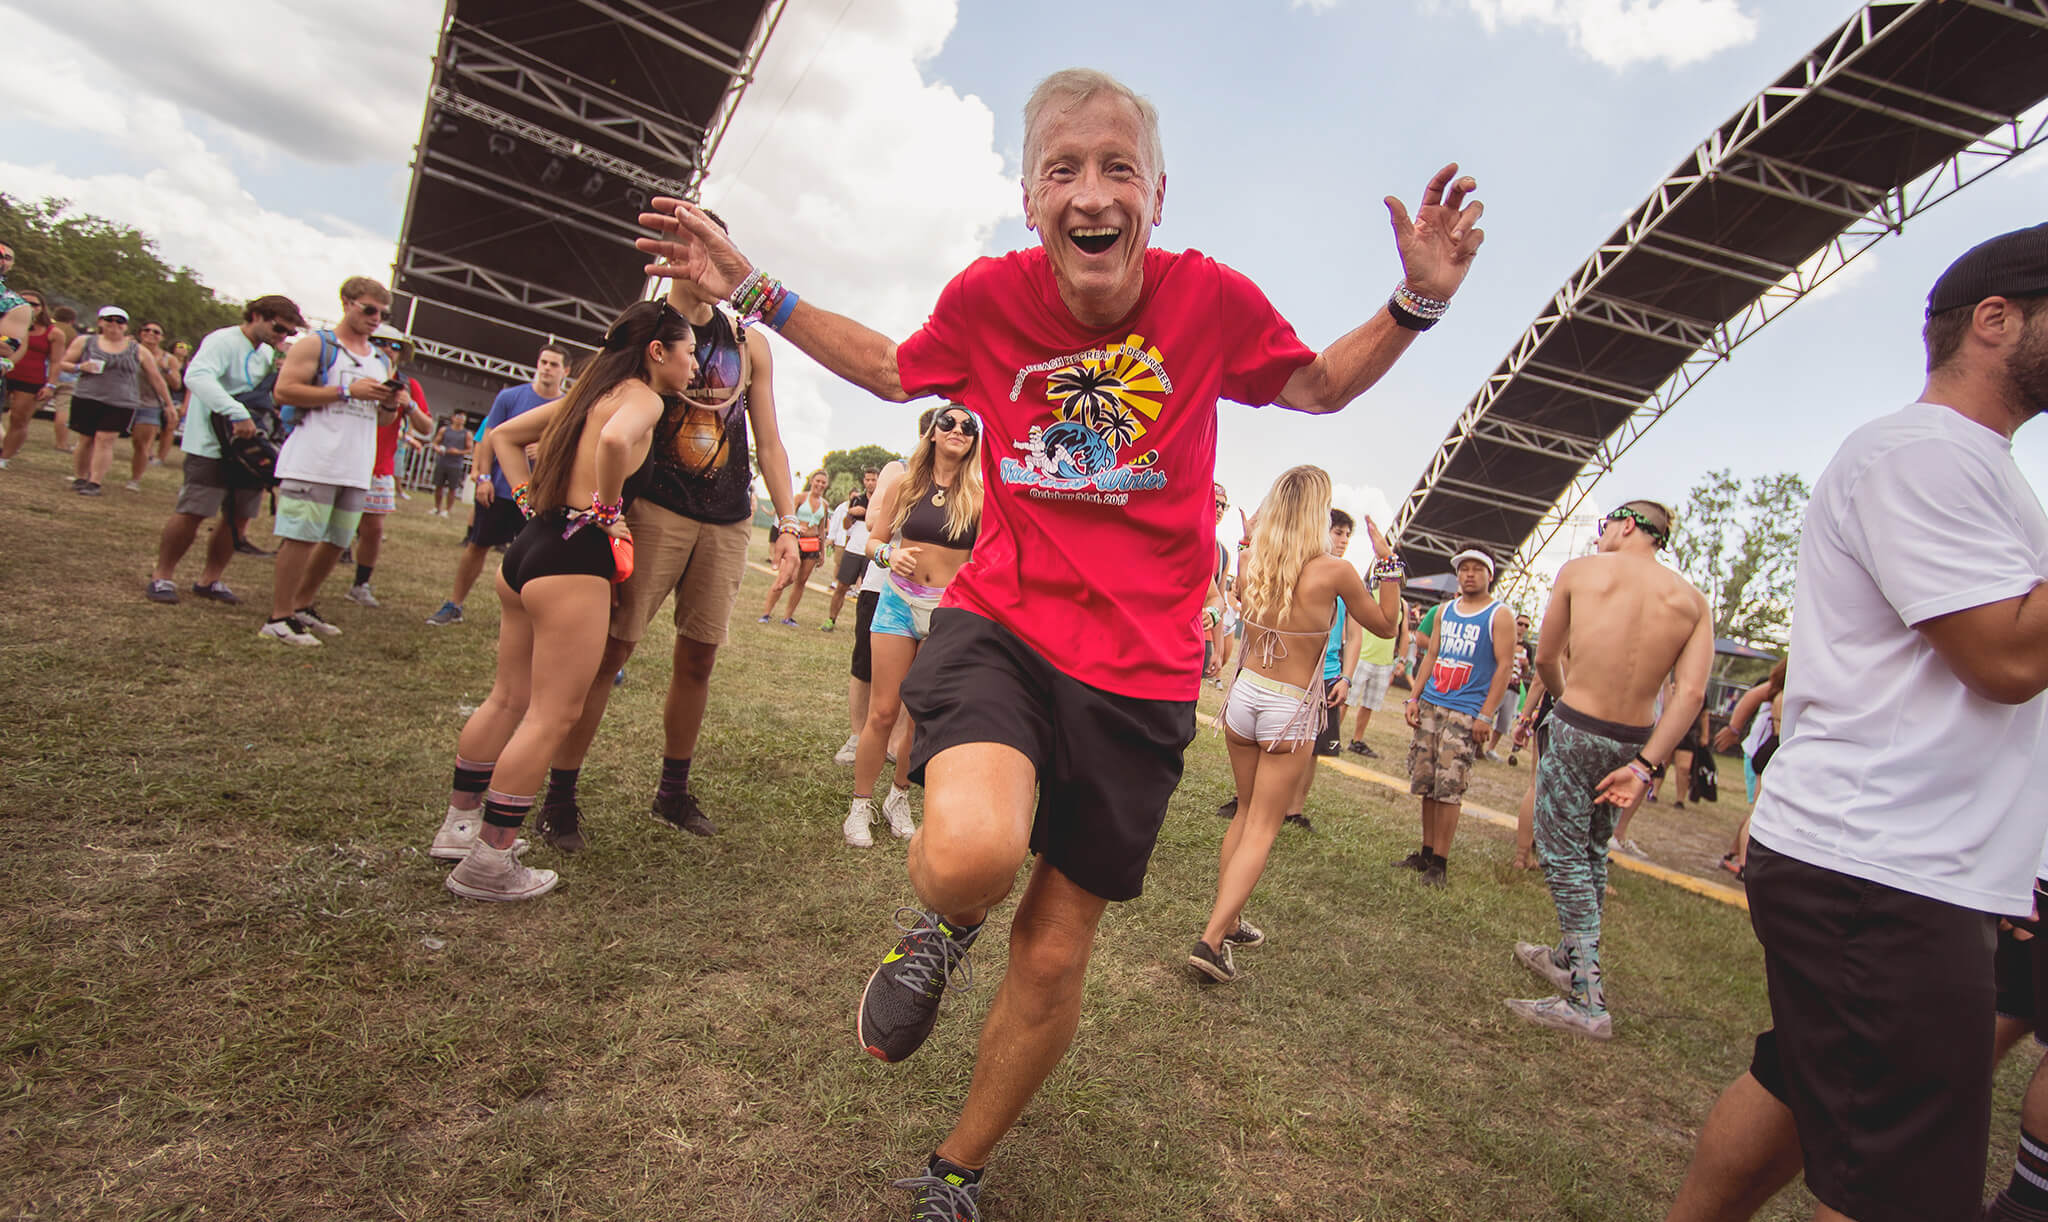 Watch this Amazing Video of a 72-Year-Old Raving at a Festival in Florida